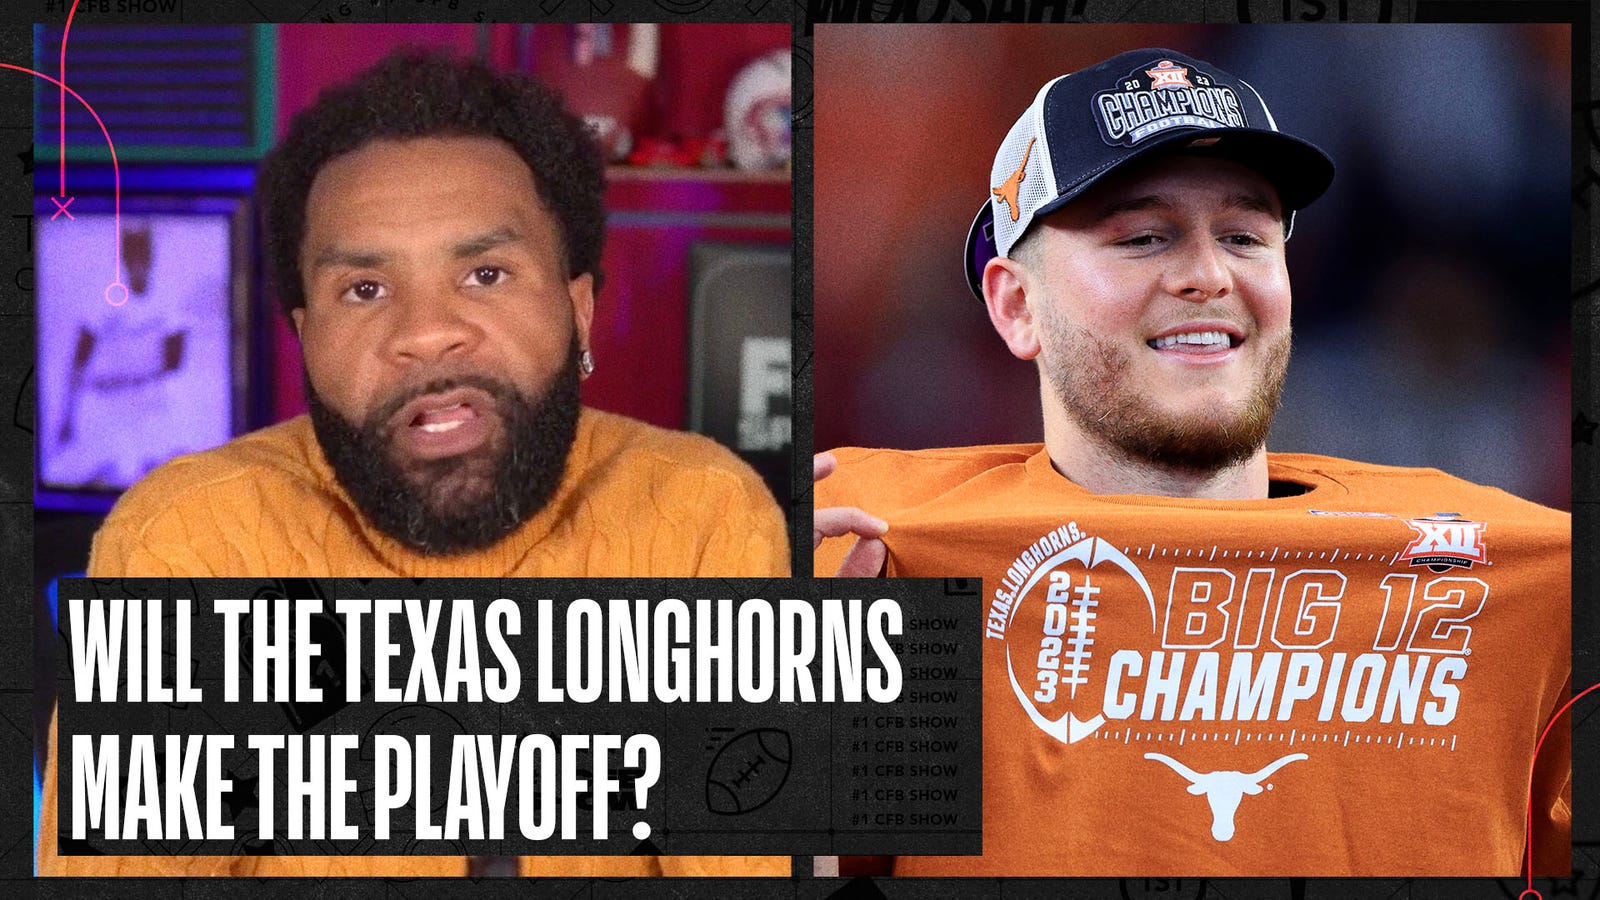 Will the Texas Longhorns make the playoff?